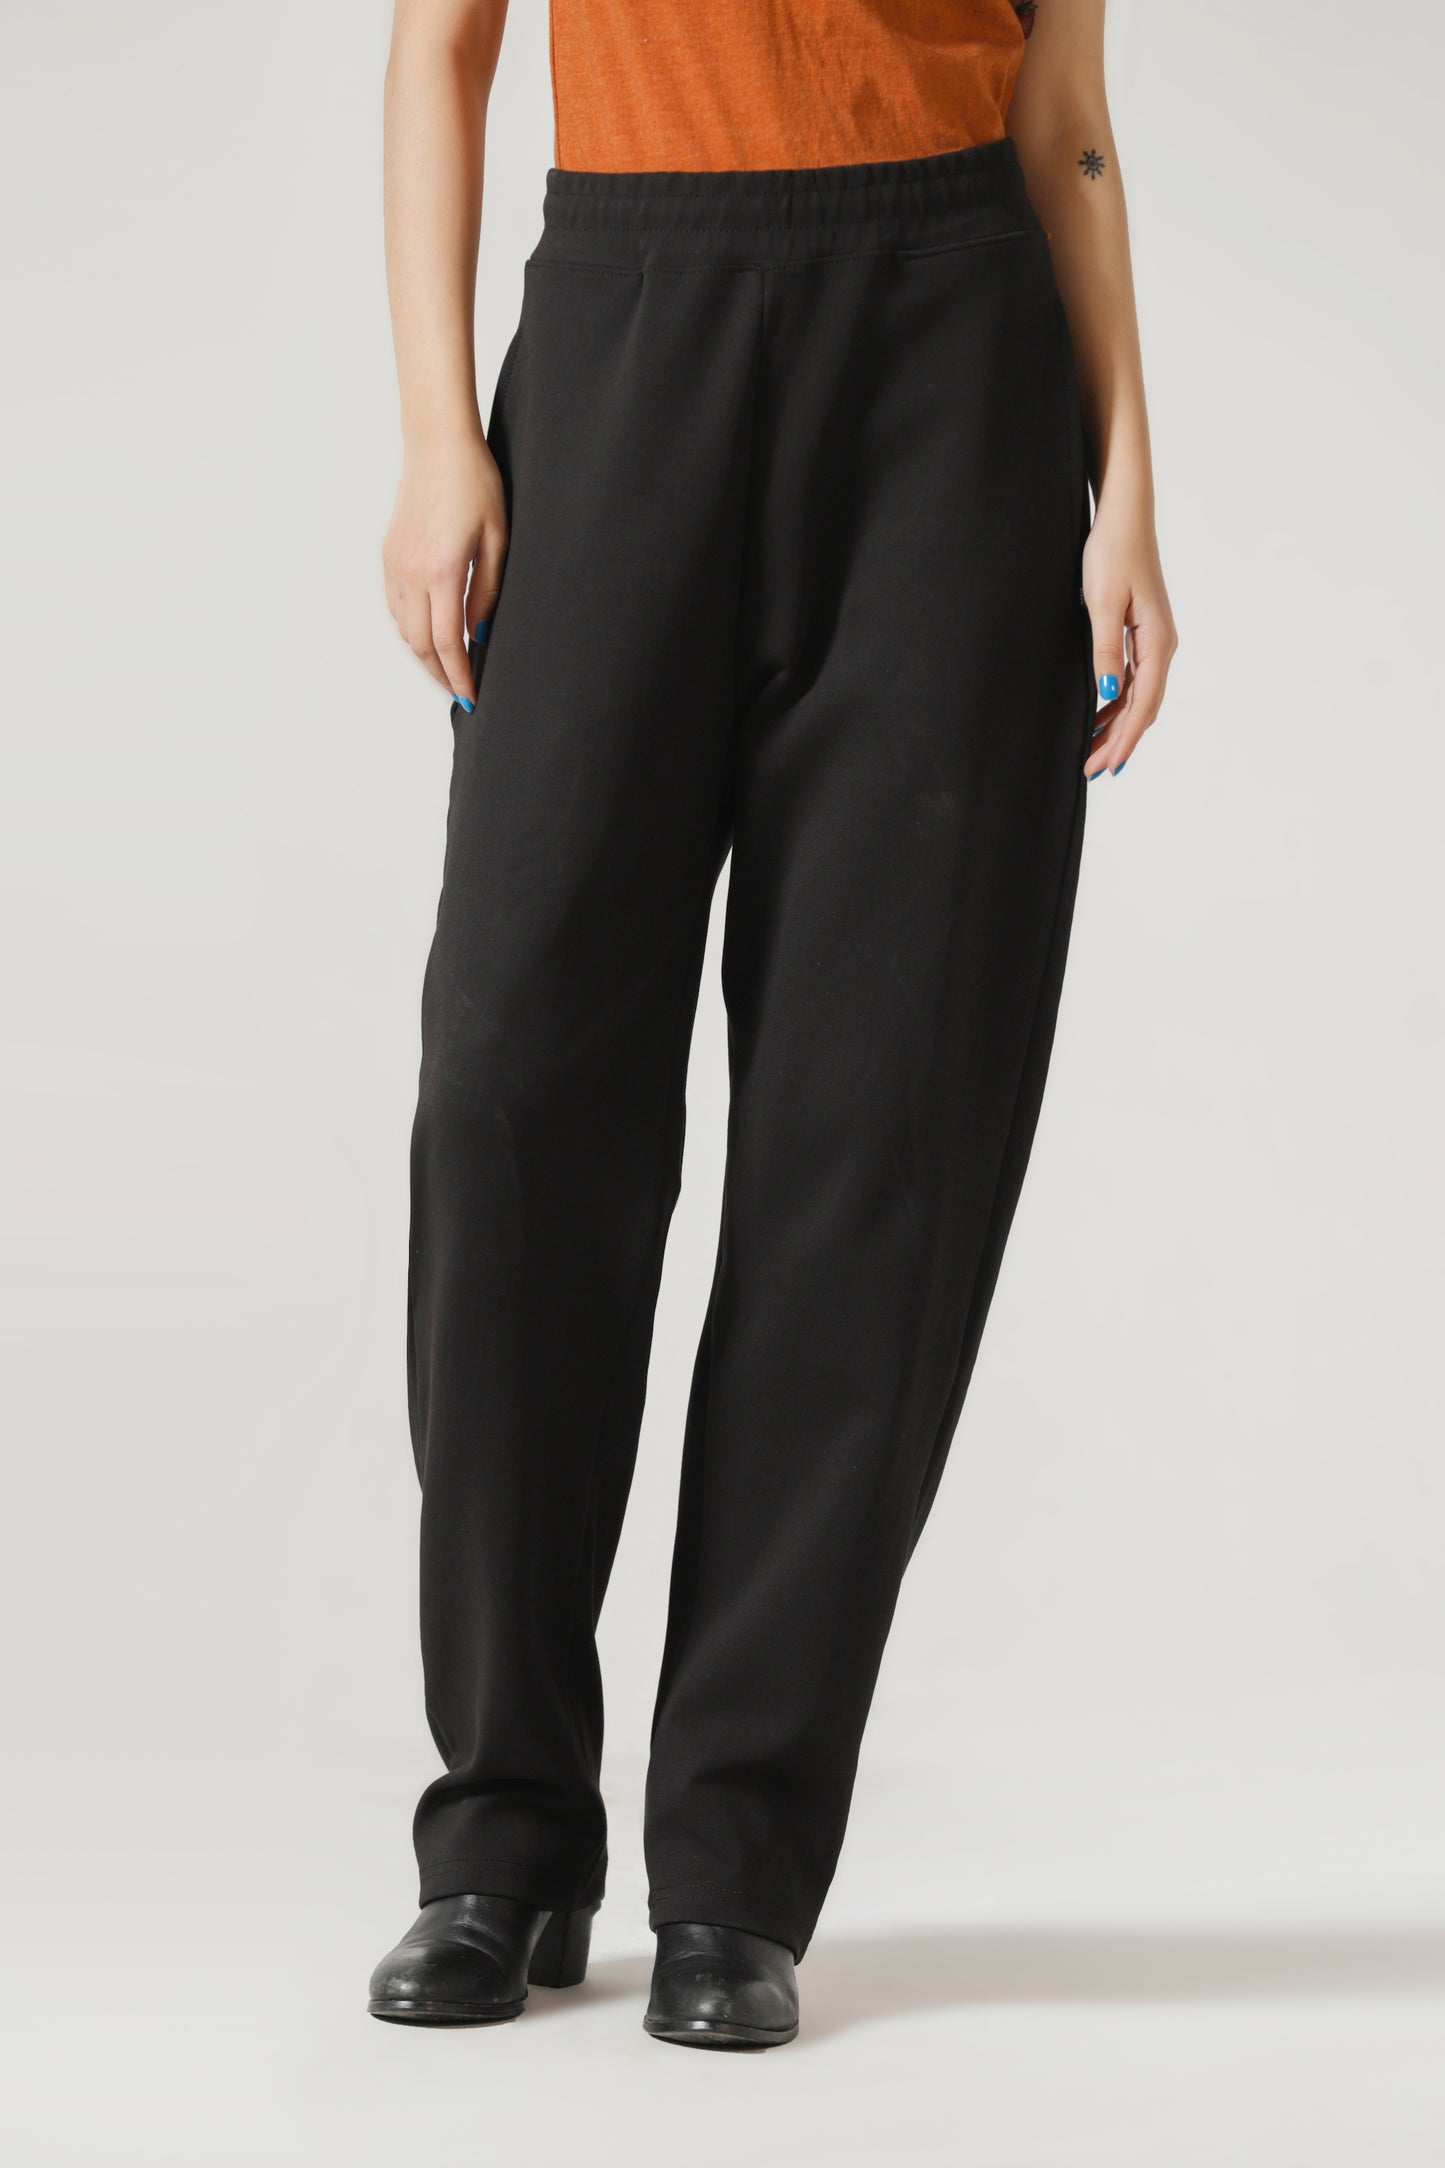 Straight-Fit Pants in Black